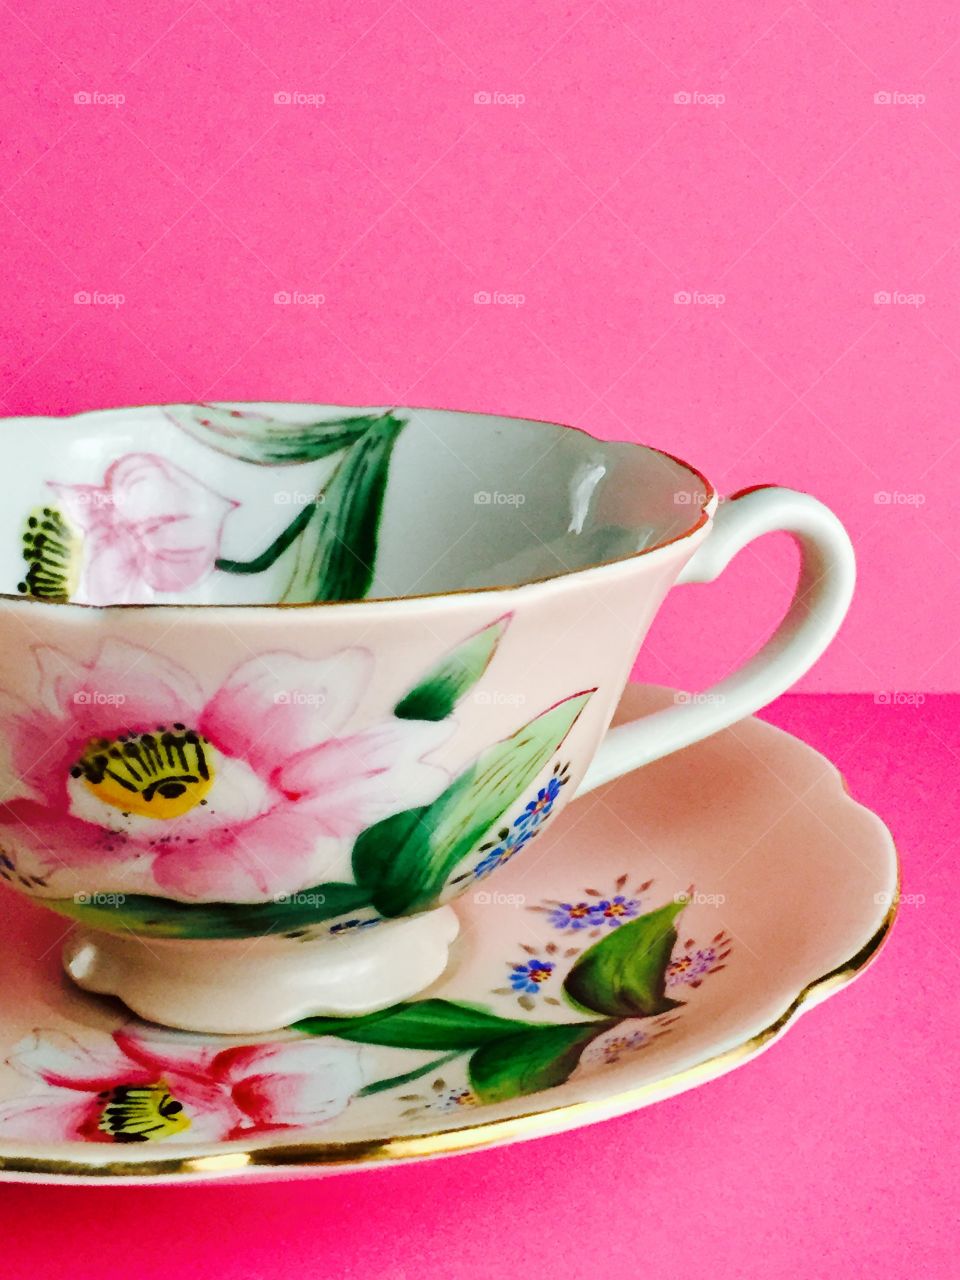 Floral pattern cup and saucer with pink background